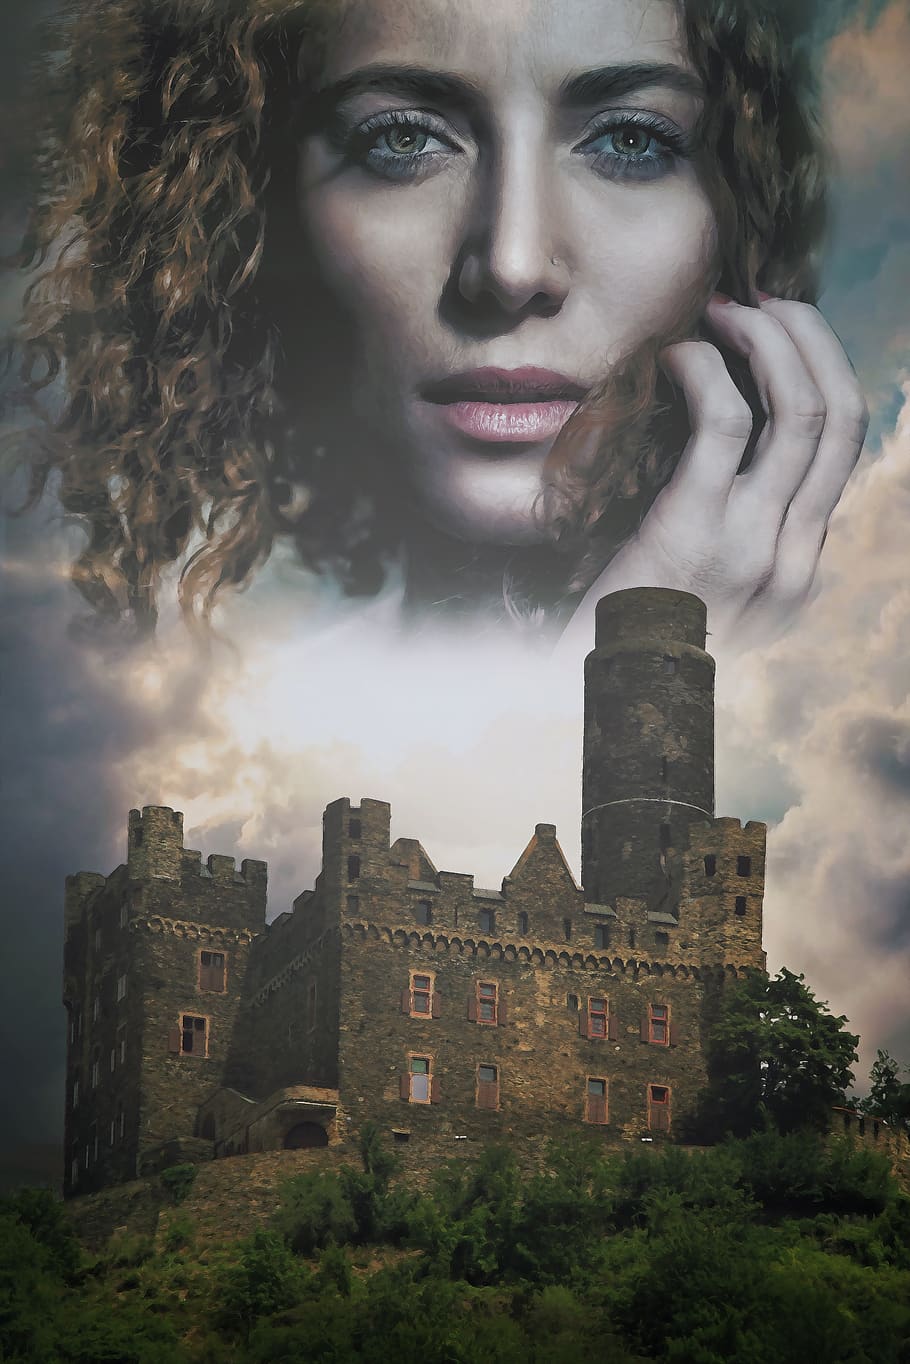 fantasy, medieval, gothic, romantic, castle, sky, lady, woman, young, beauty